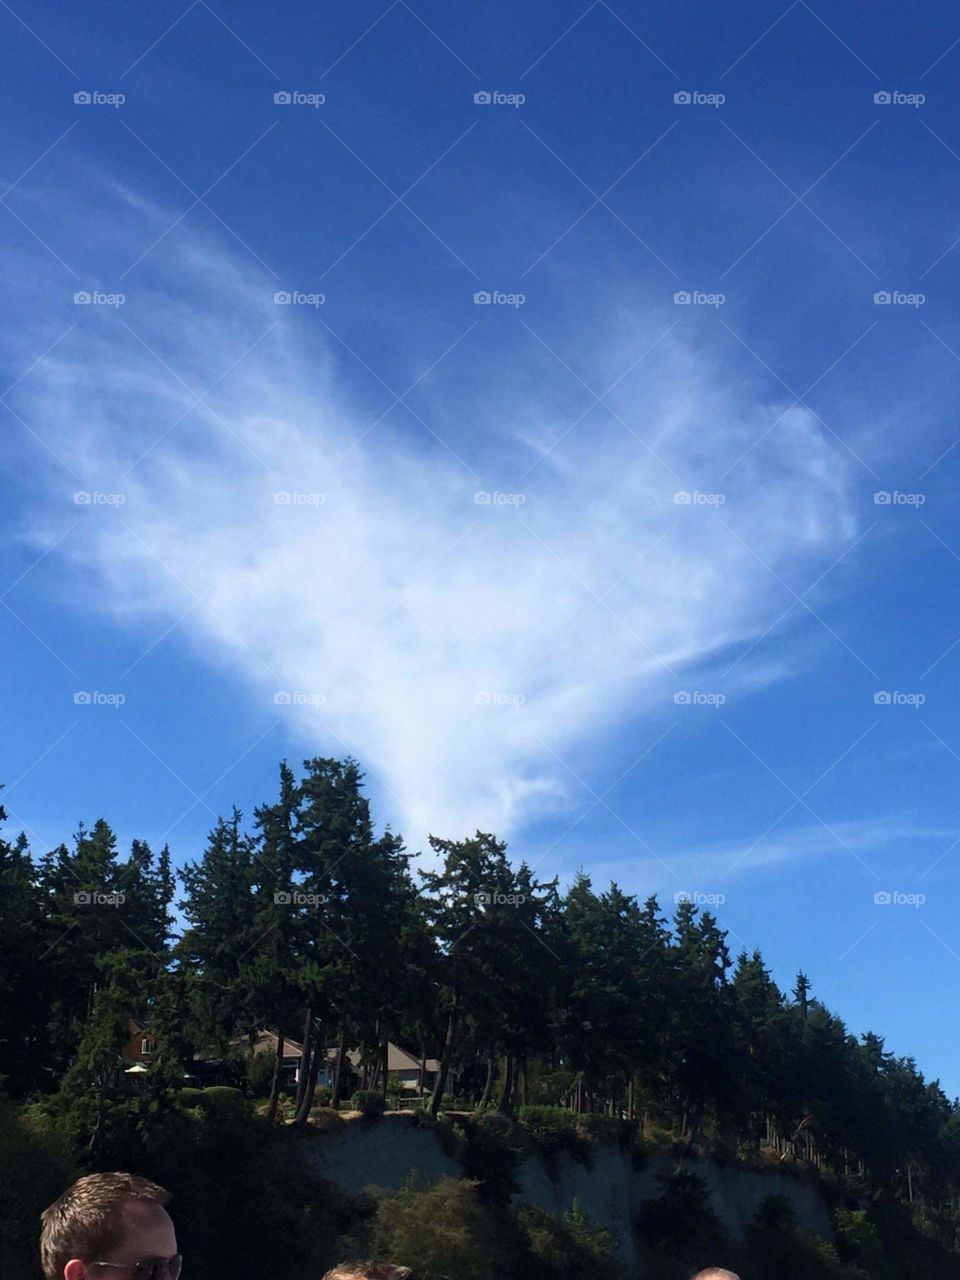 Nature's heart above a wedding